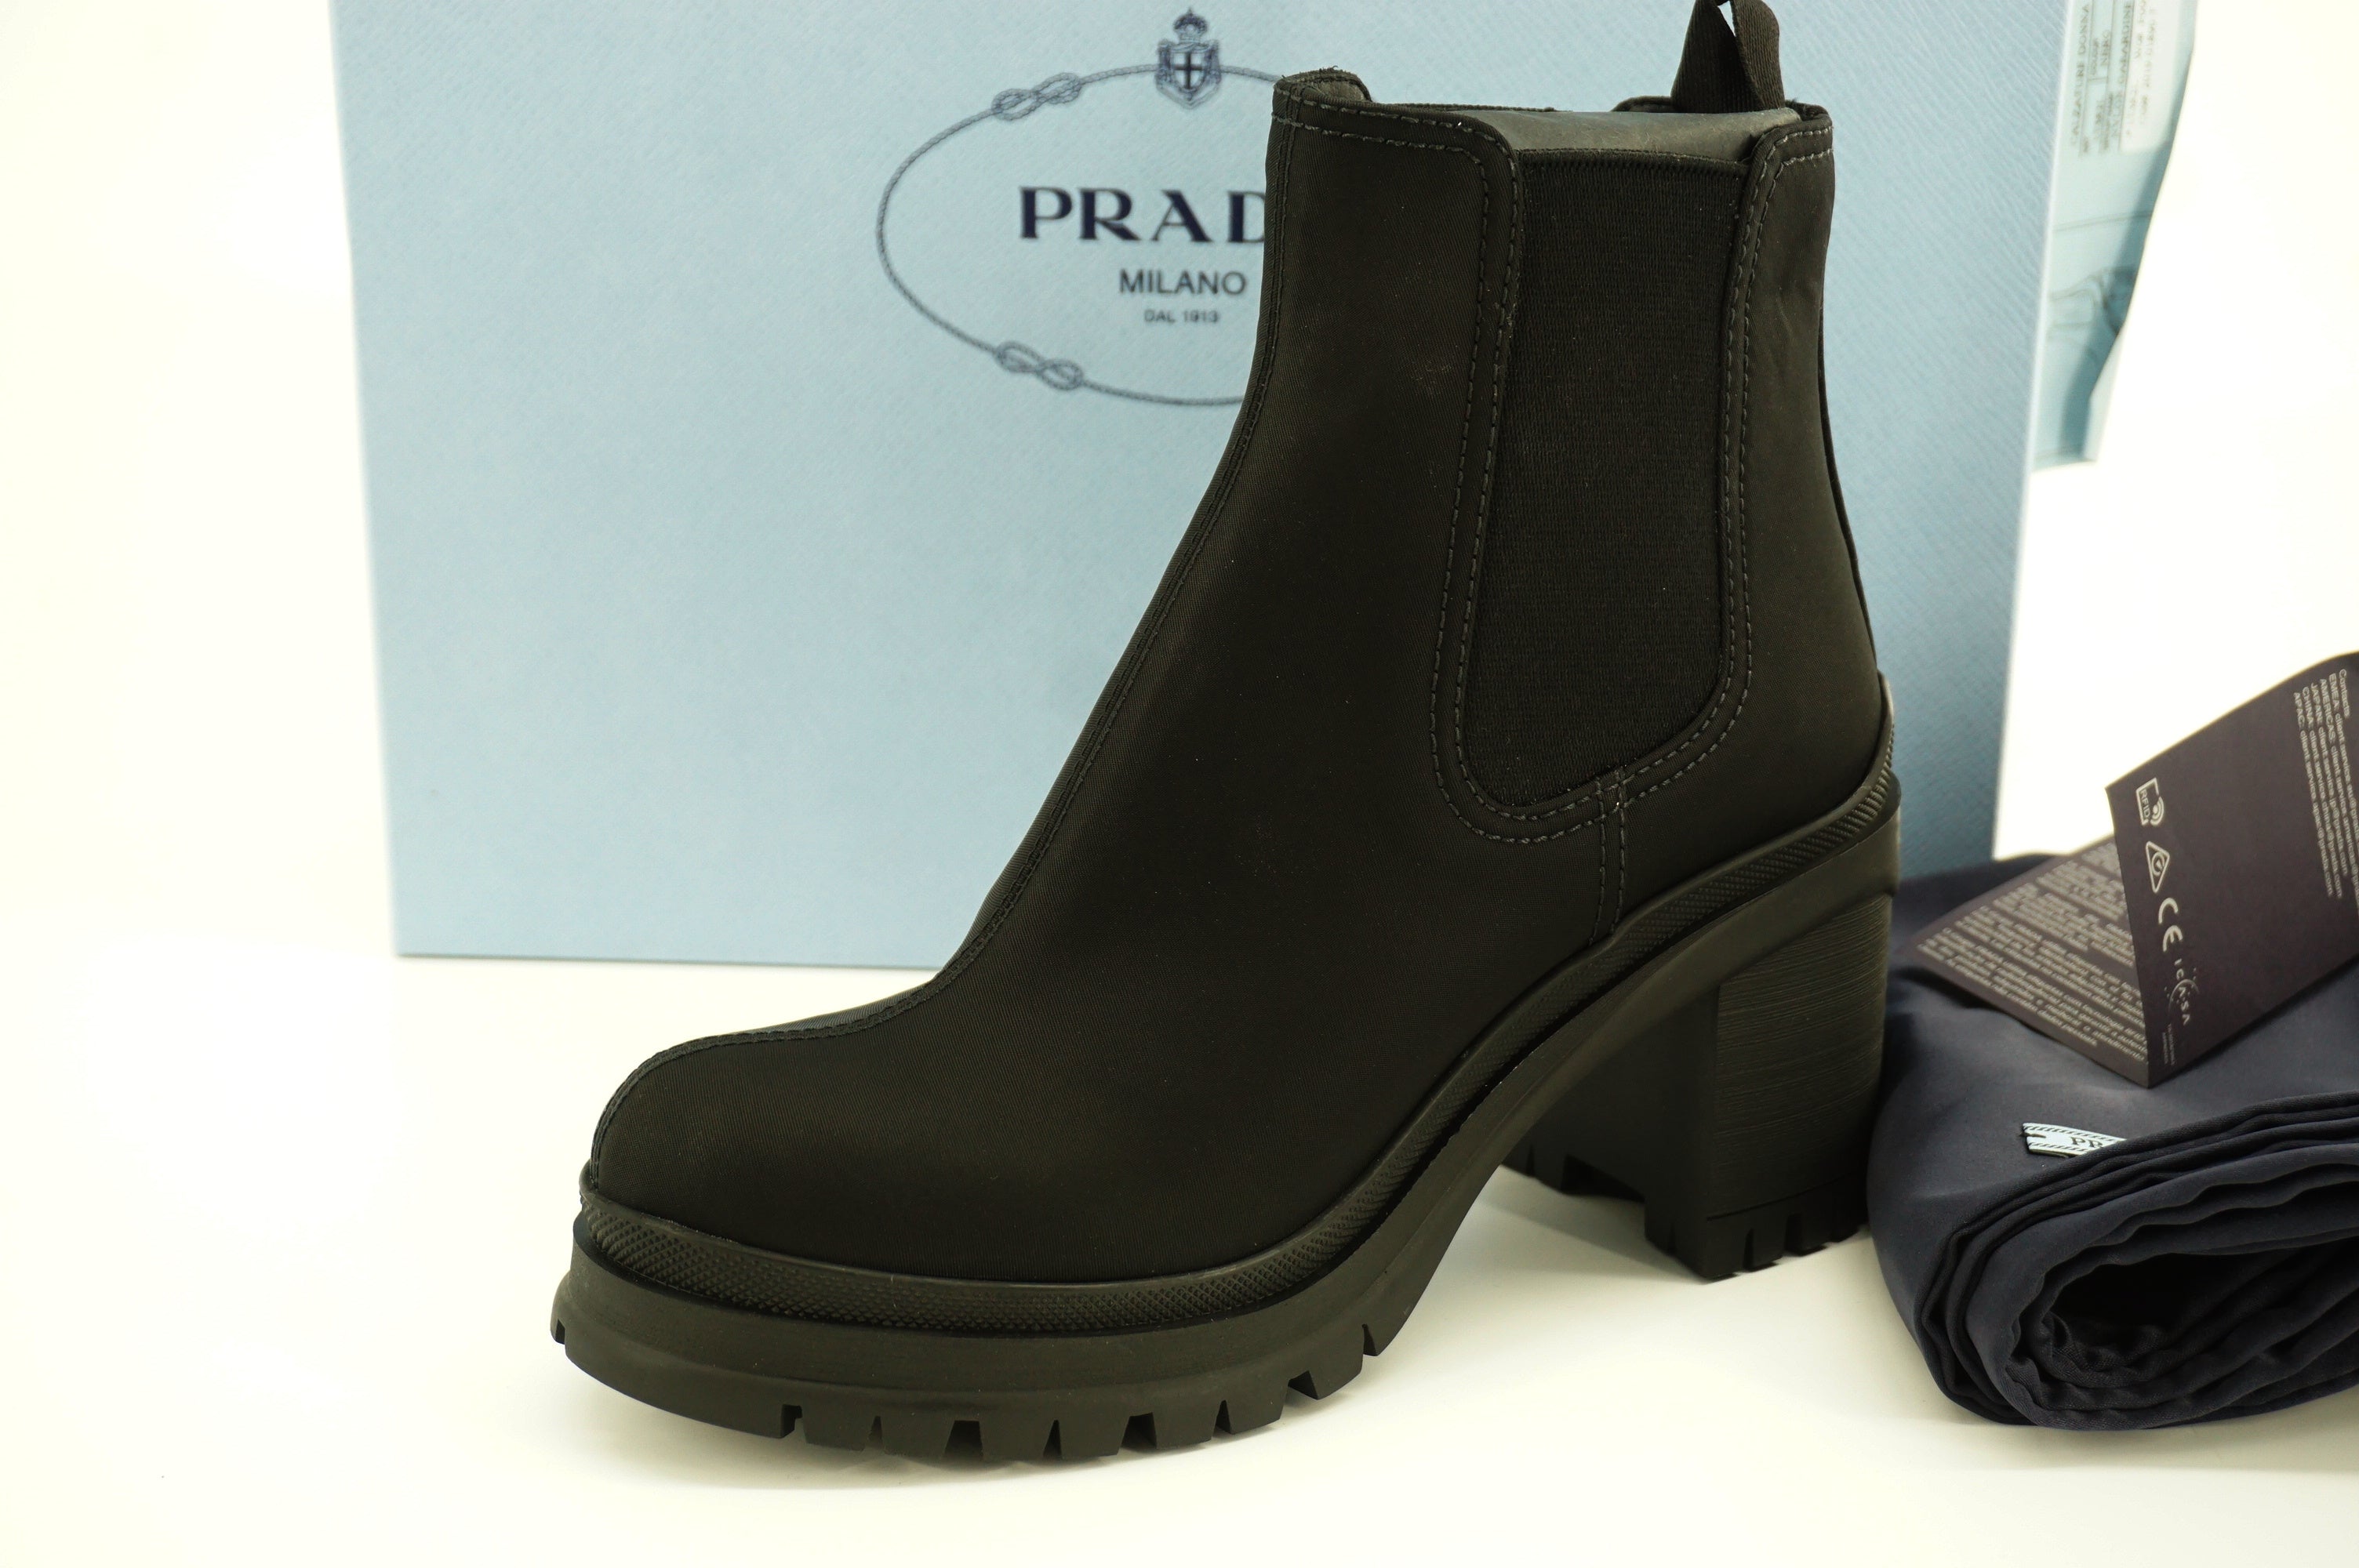 Prada Black Pull On Chelsea Combat Stretch Ankle Boots SZ 36.5 New Lugg $775